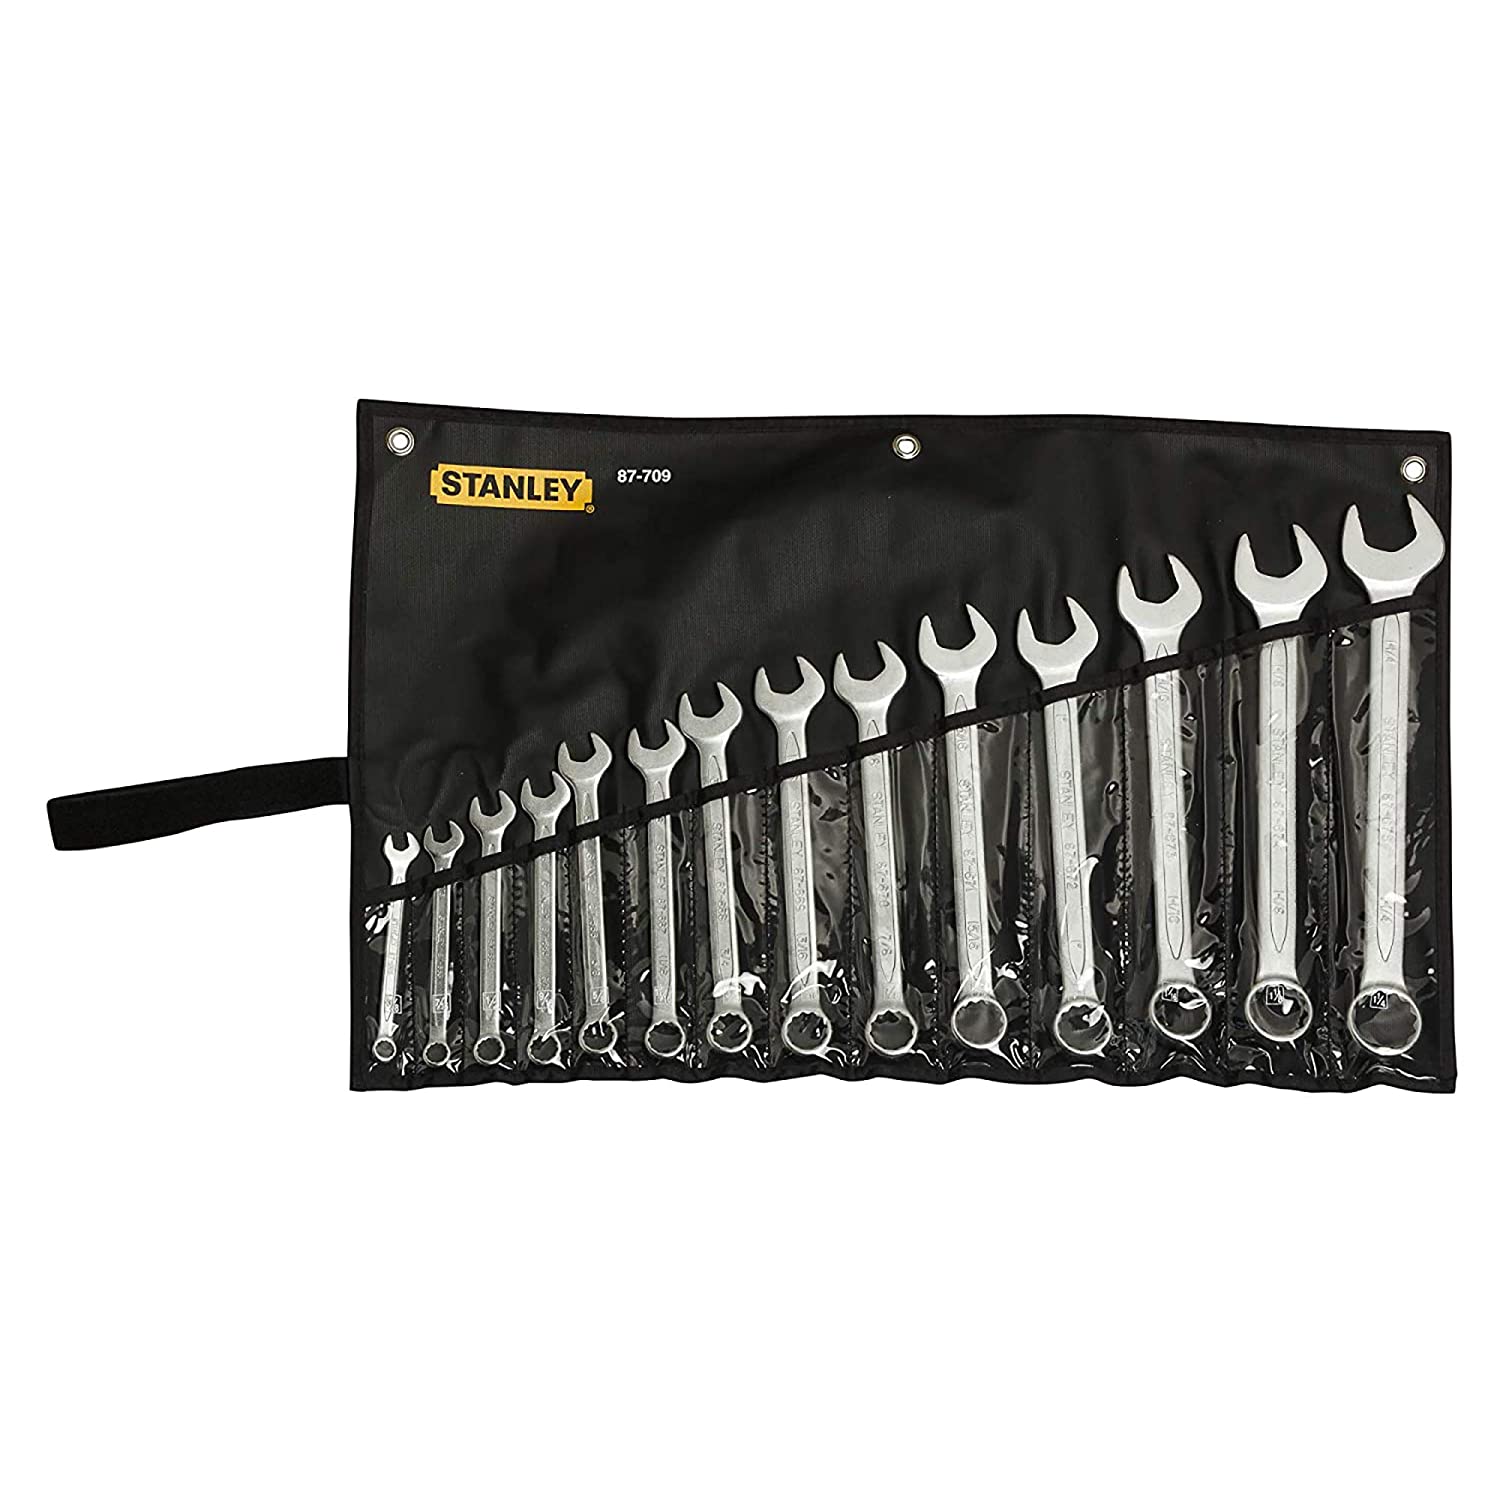 STANLEY 1-87-709 10-32mm Slimline Inches/Imperial Combination Spanner Set (Silver, 14-Pieces)